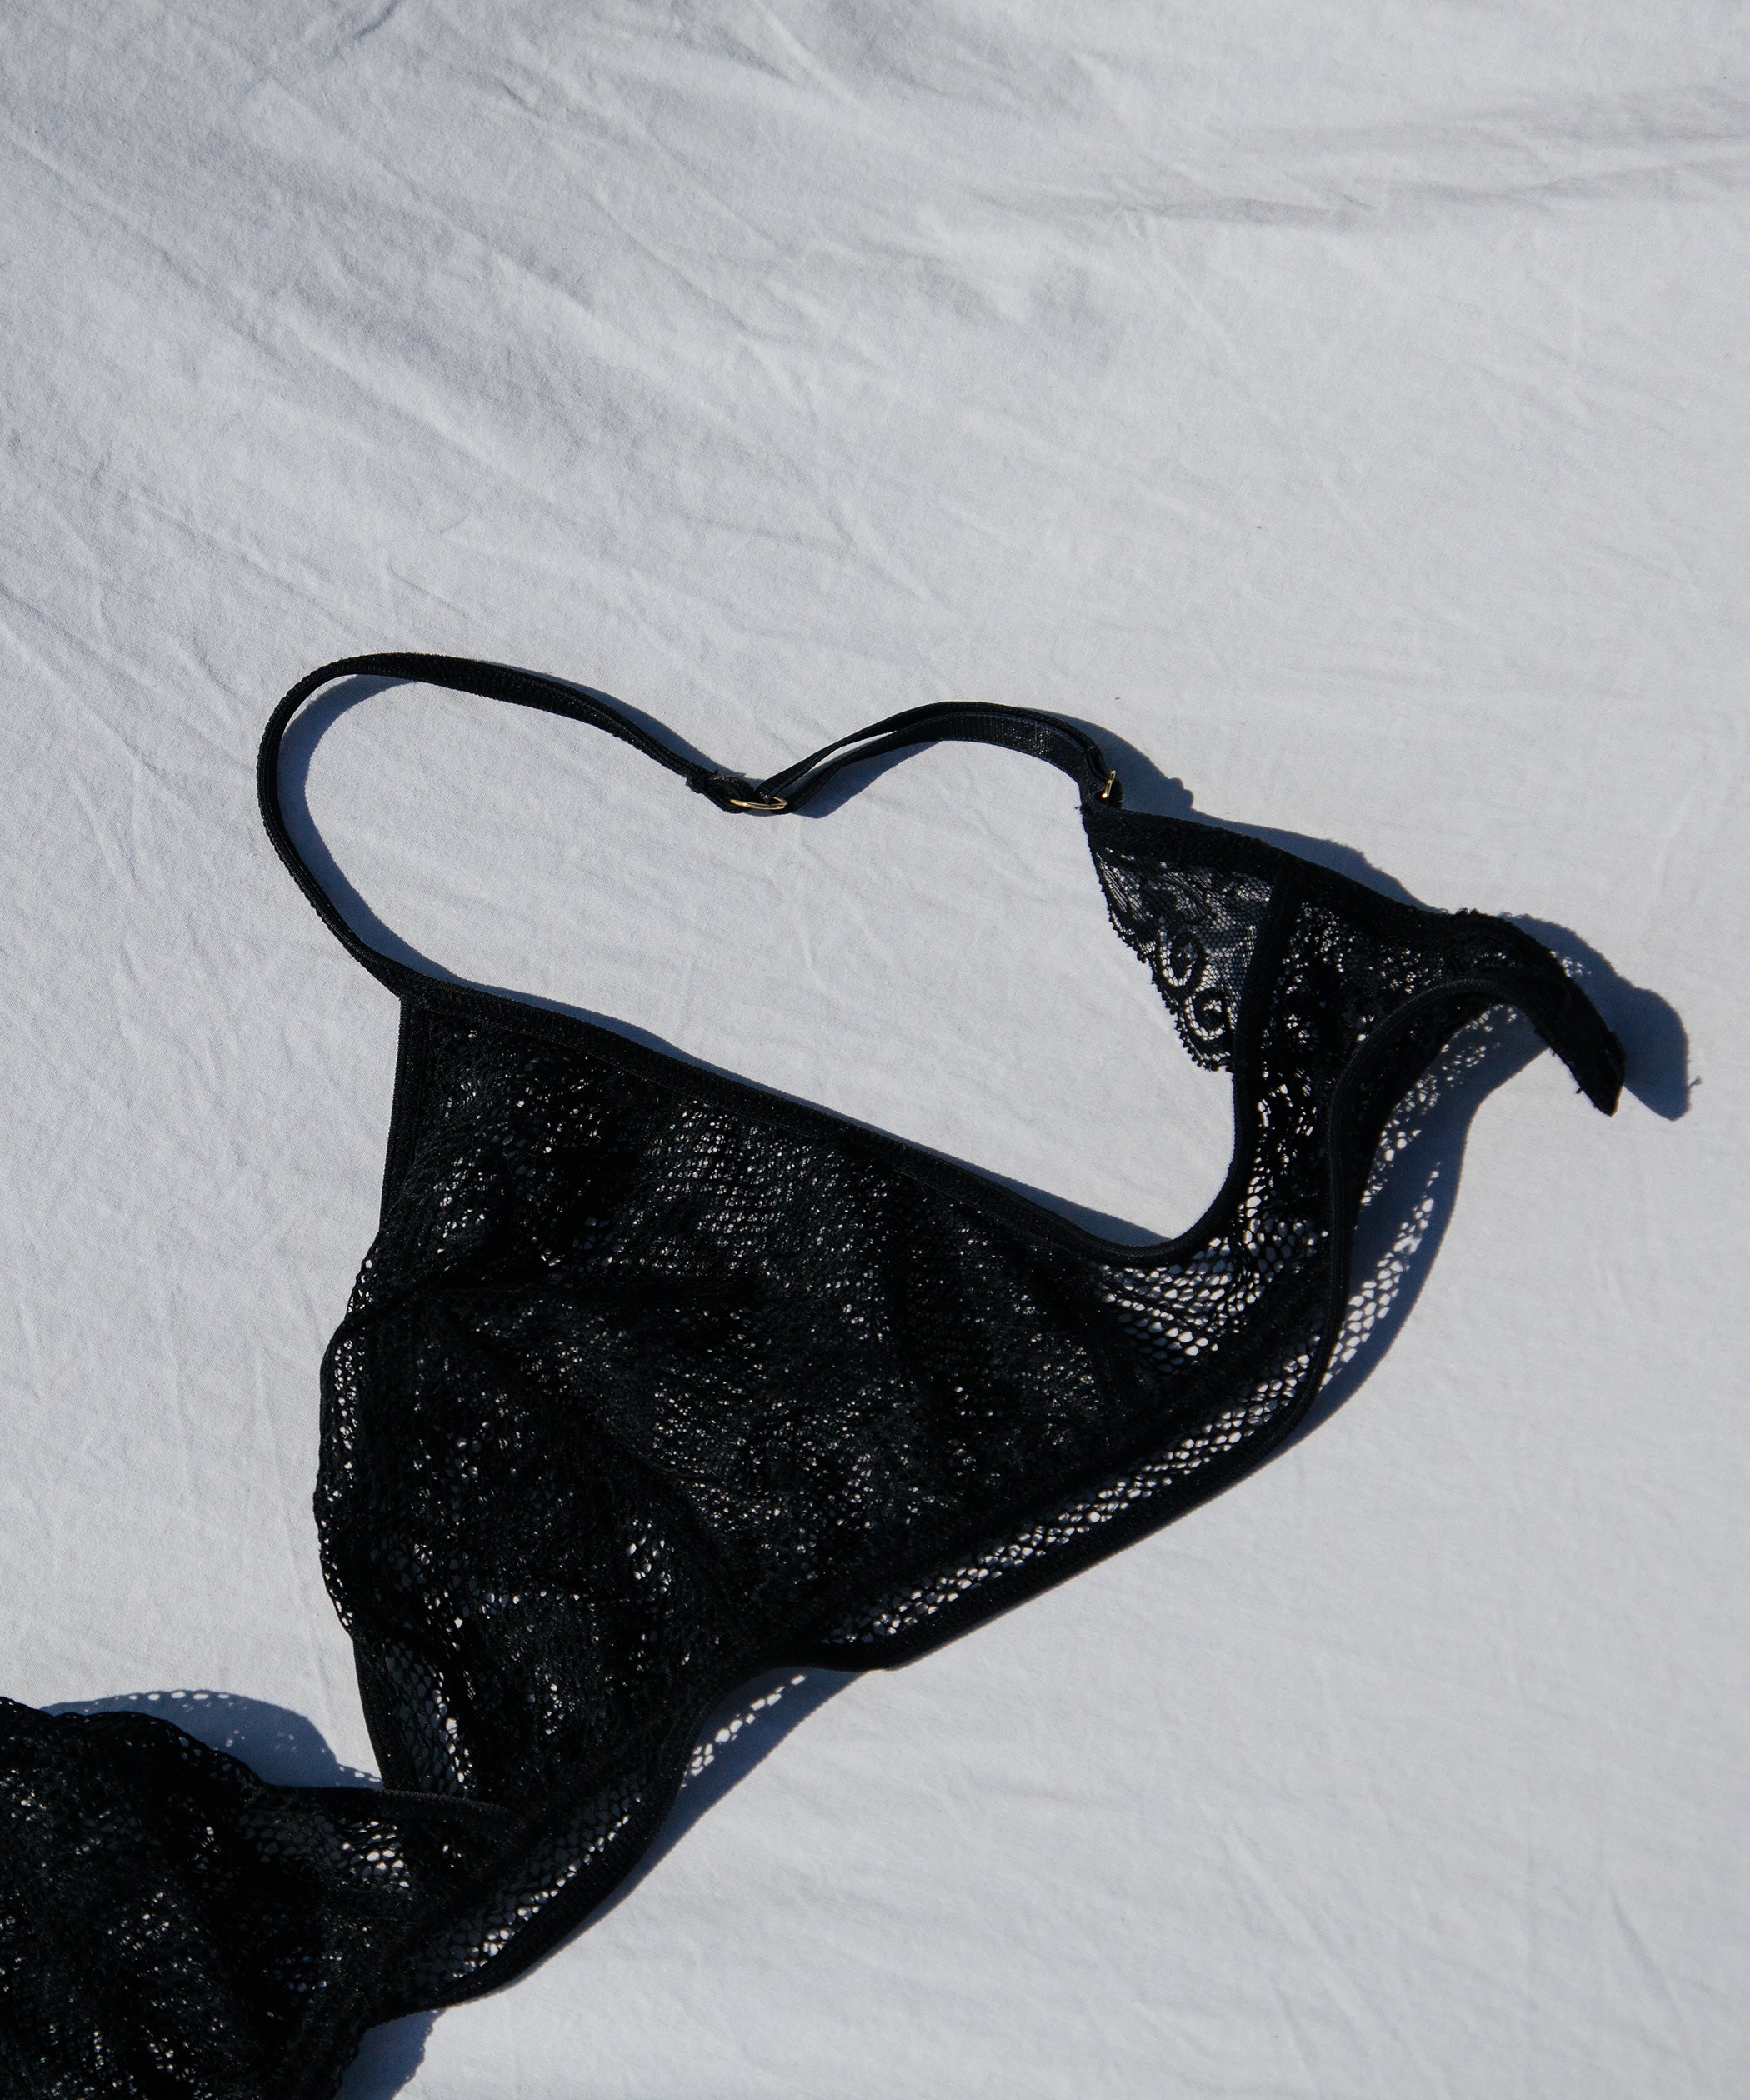 Why is male underwear not called a panty? - Quora